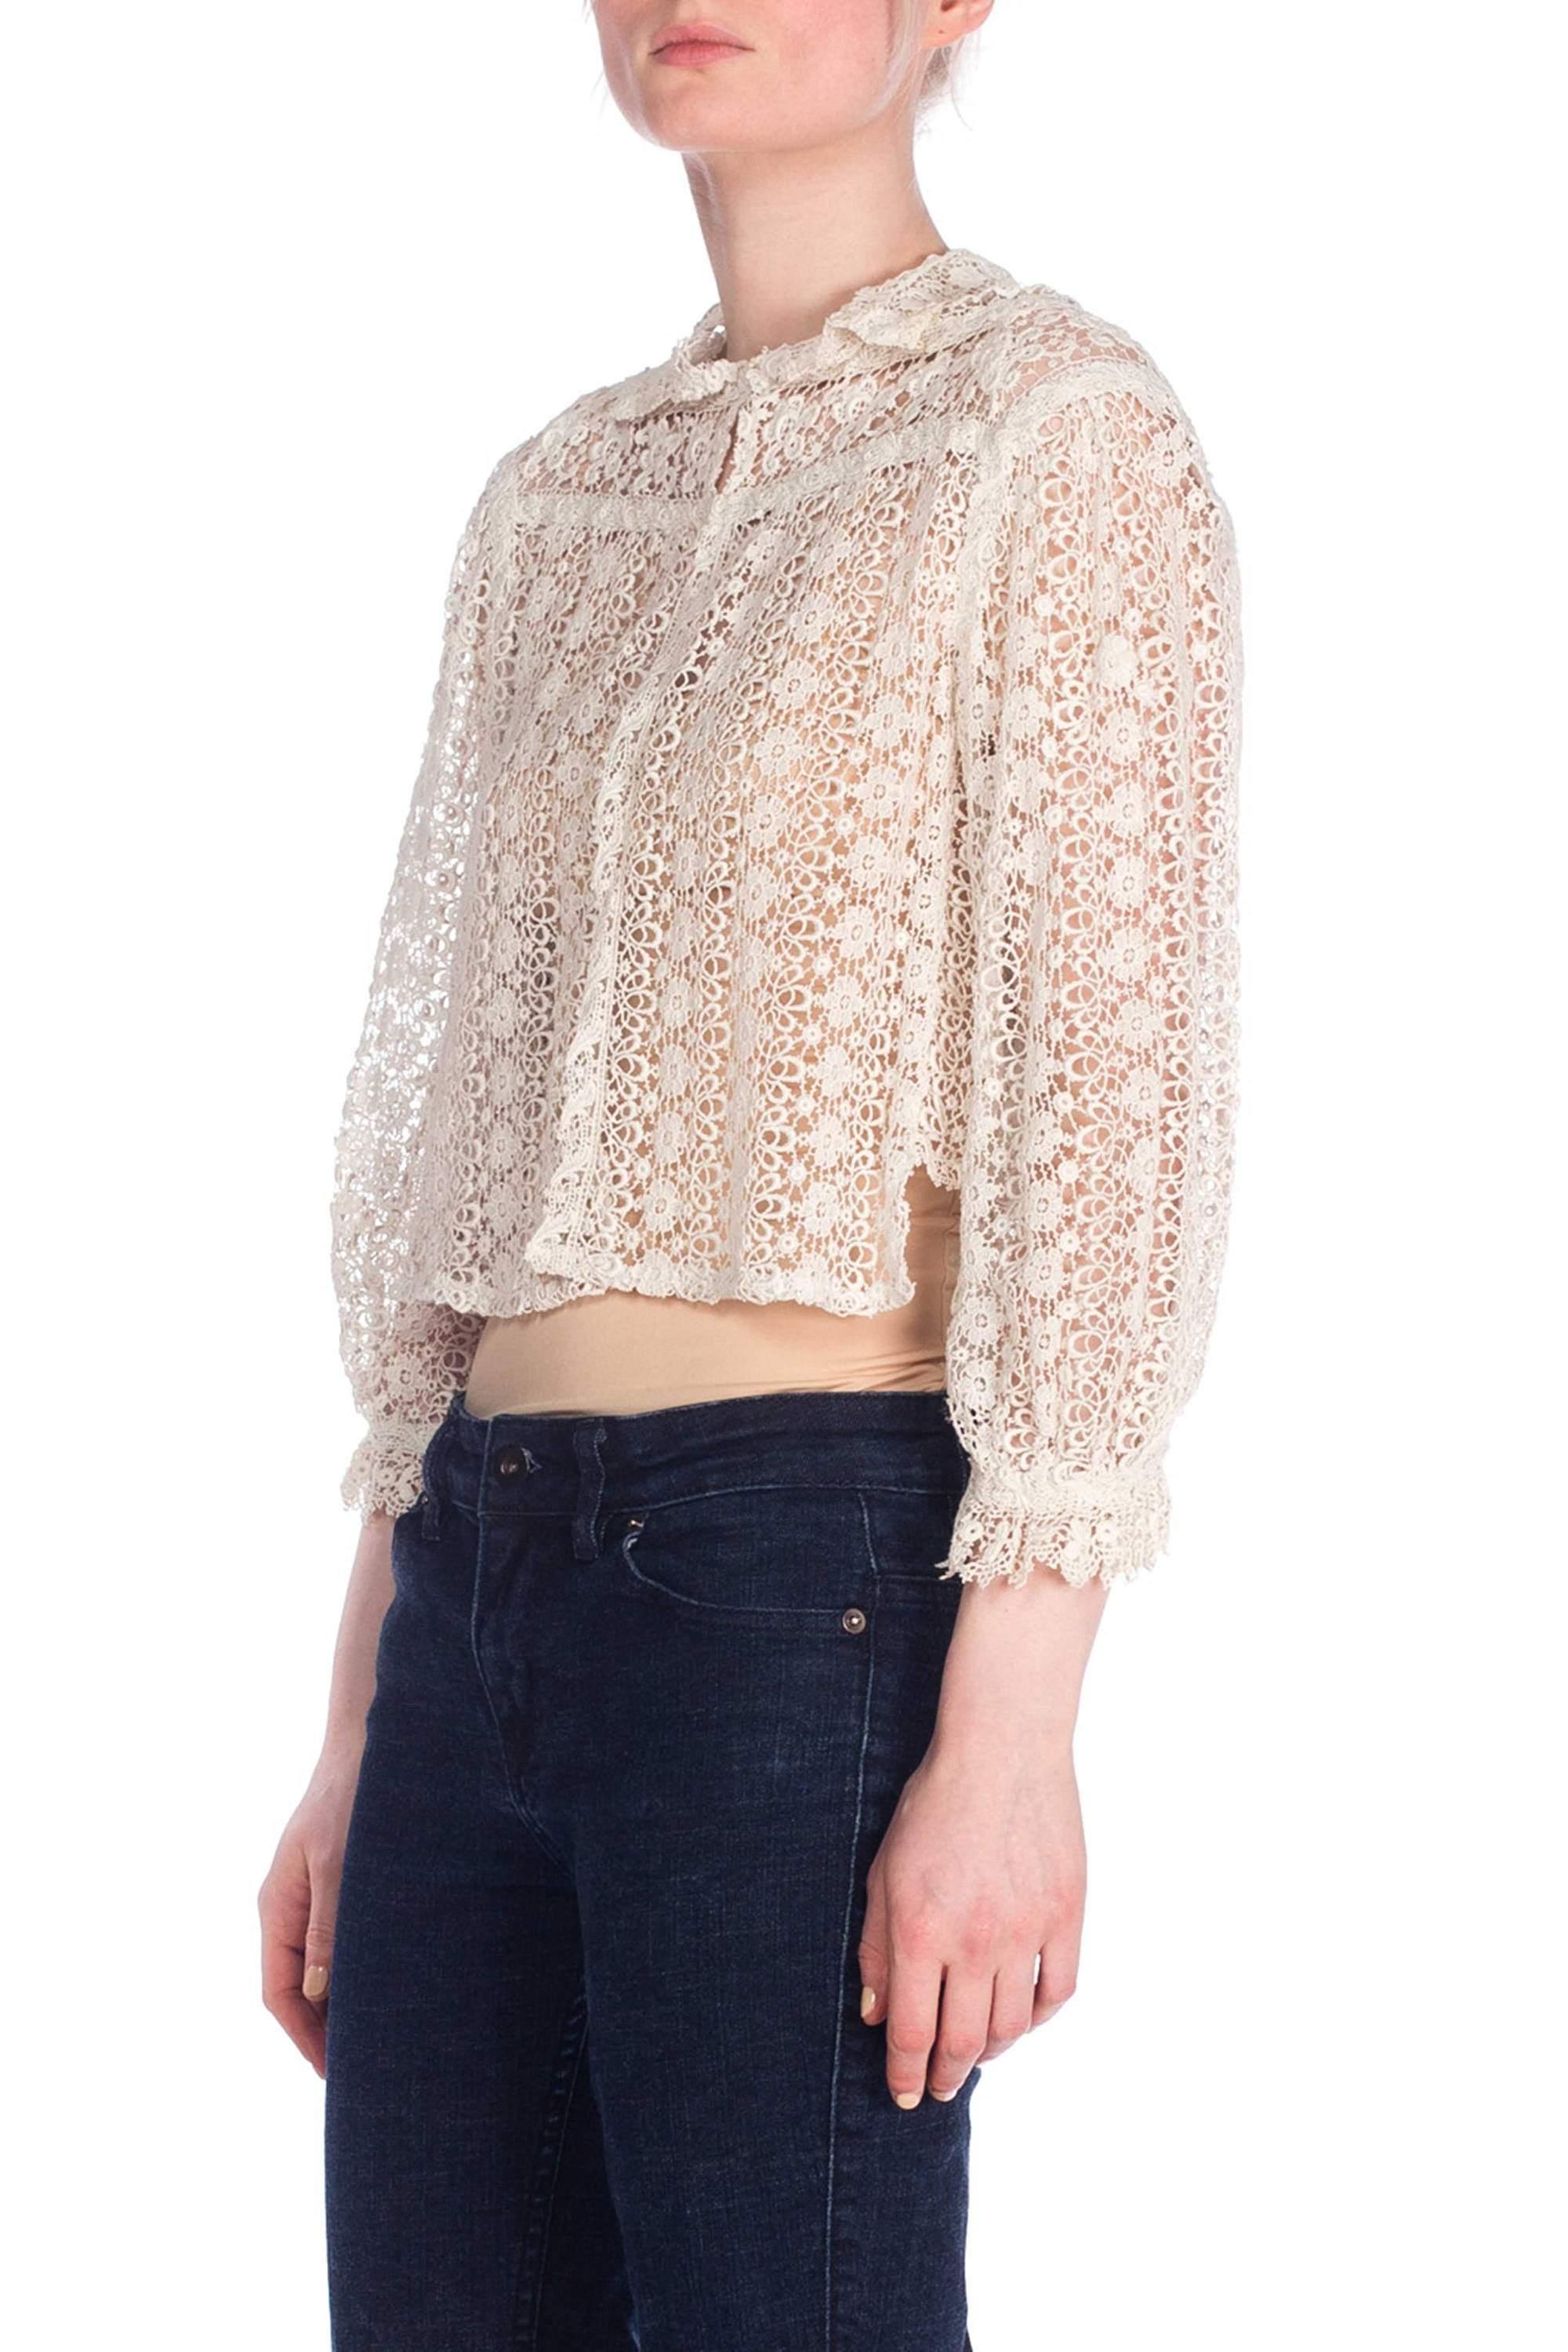 Edwardian Off White Cotton Thick Crochet Style Lace Jacket Top With 3/4 Length Sleeves